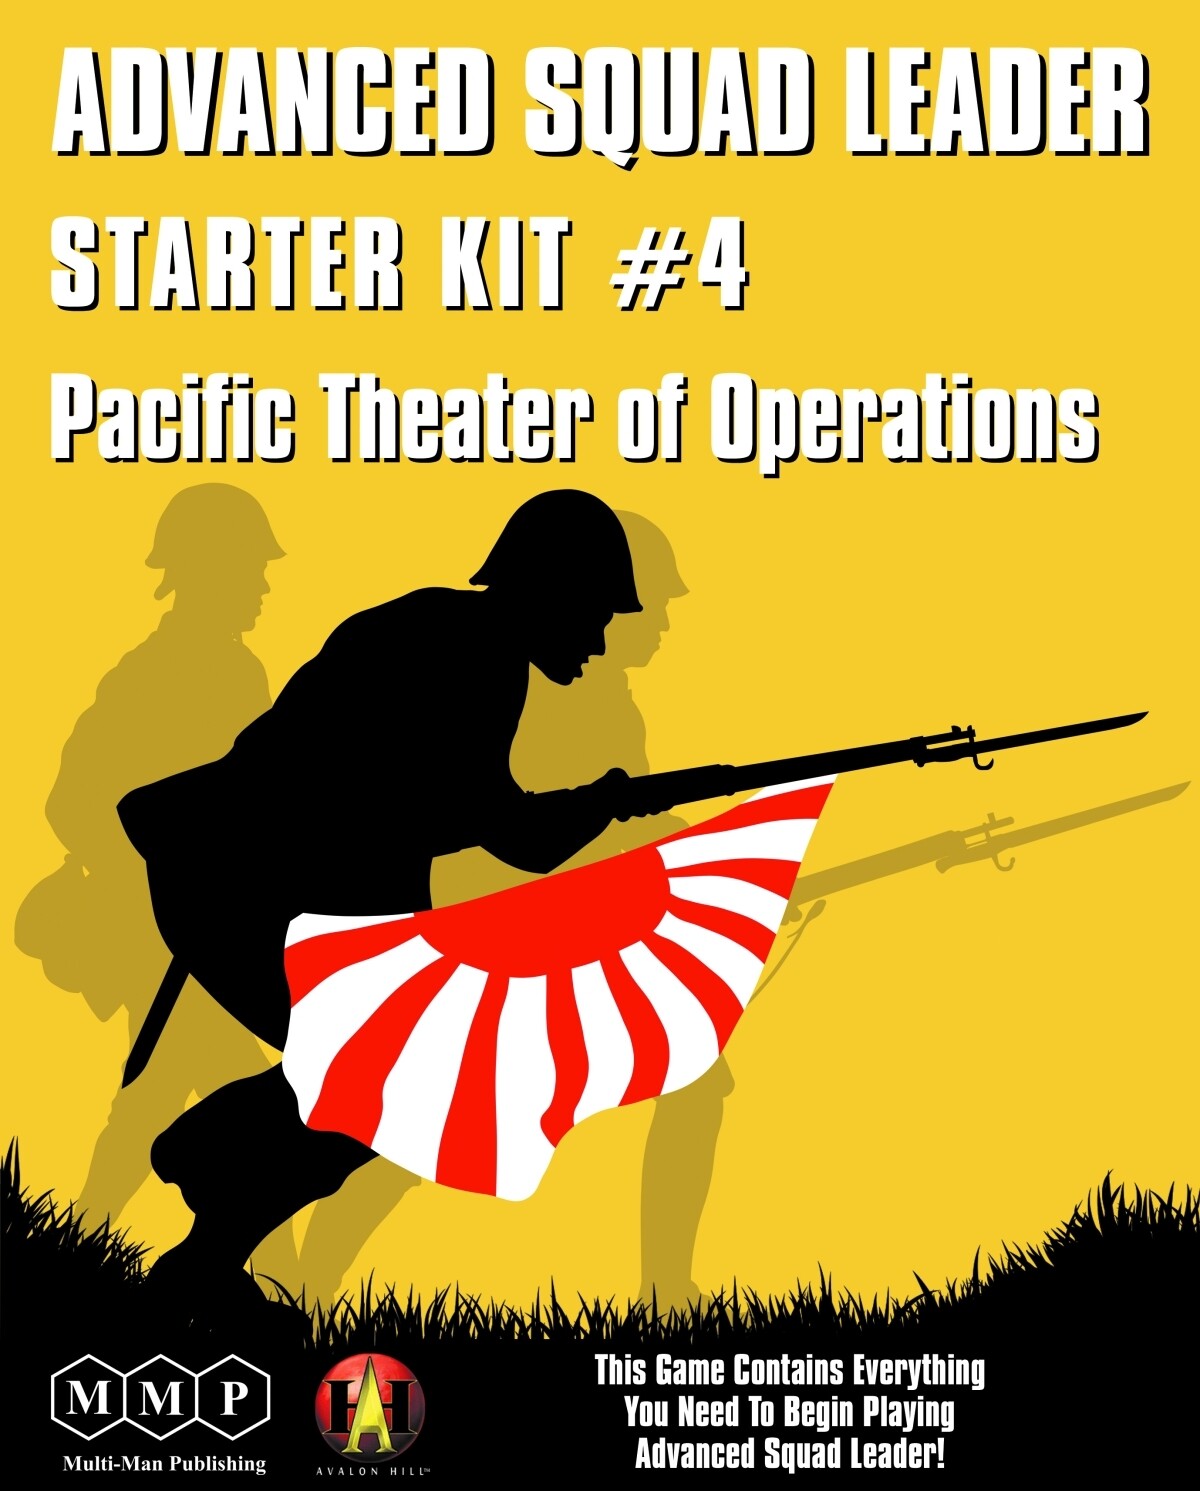 Advanced Squad Leader: Starter Kit #4 - Pacific Theater of Operations